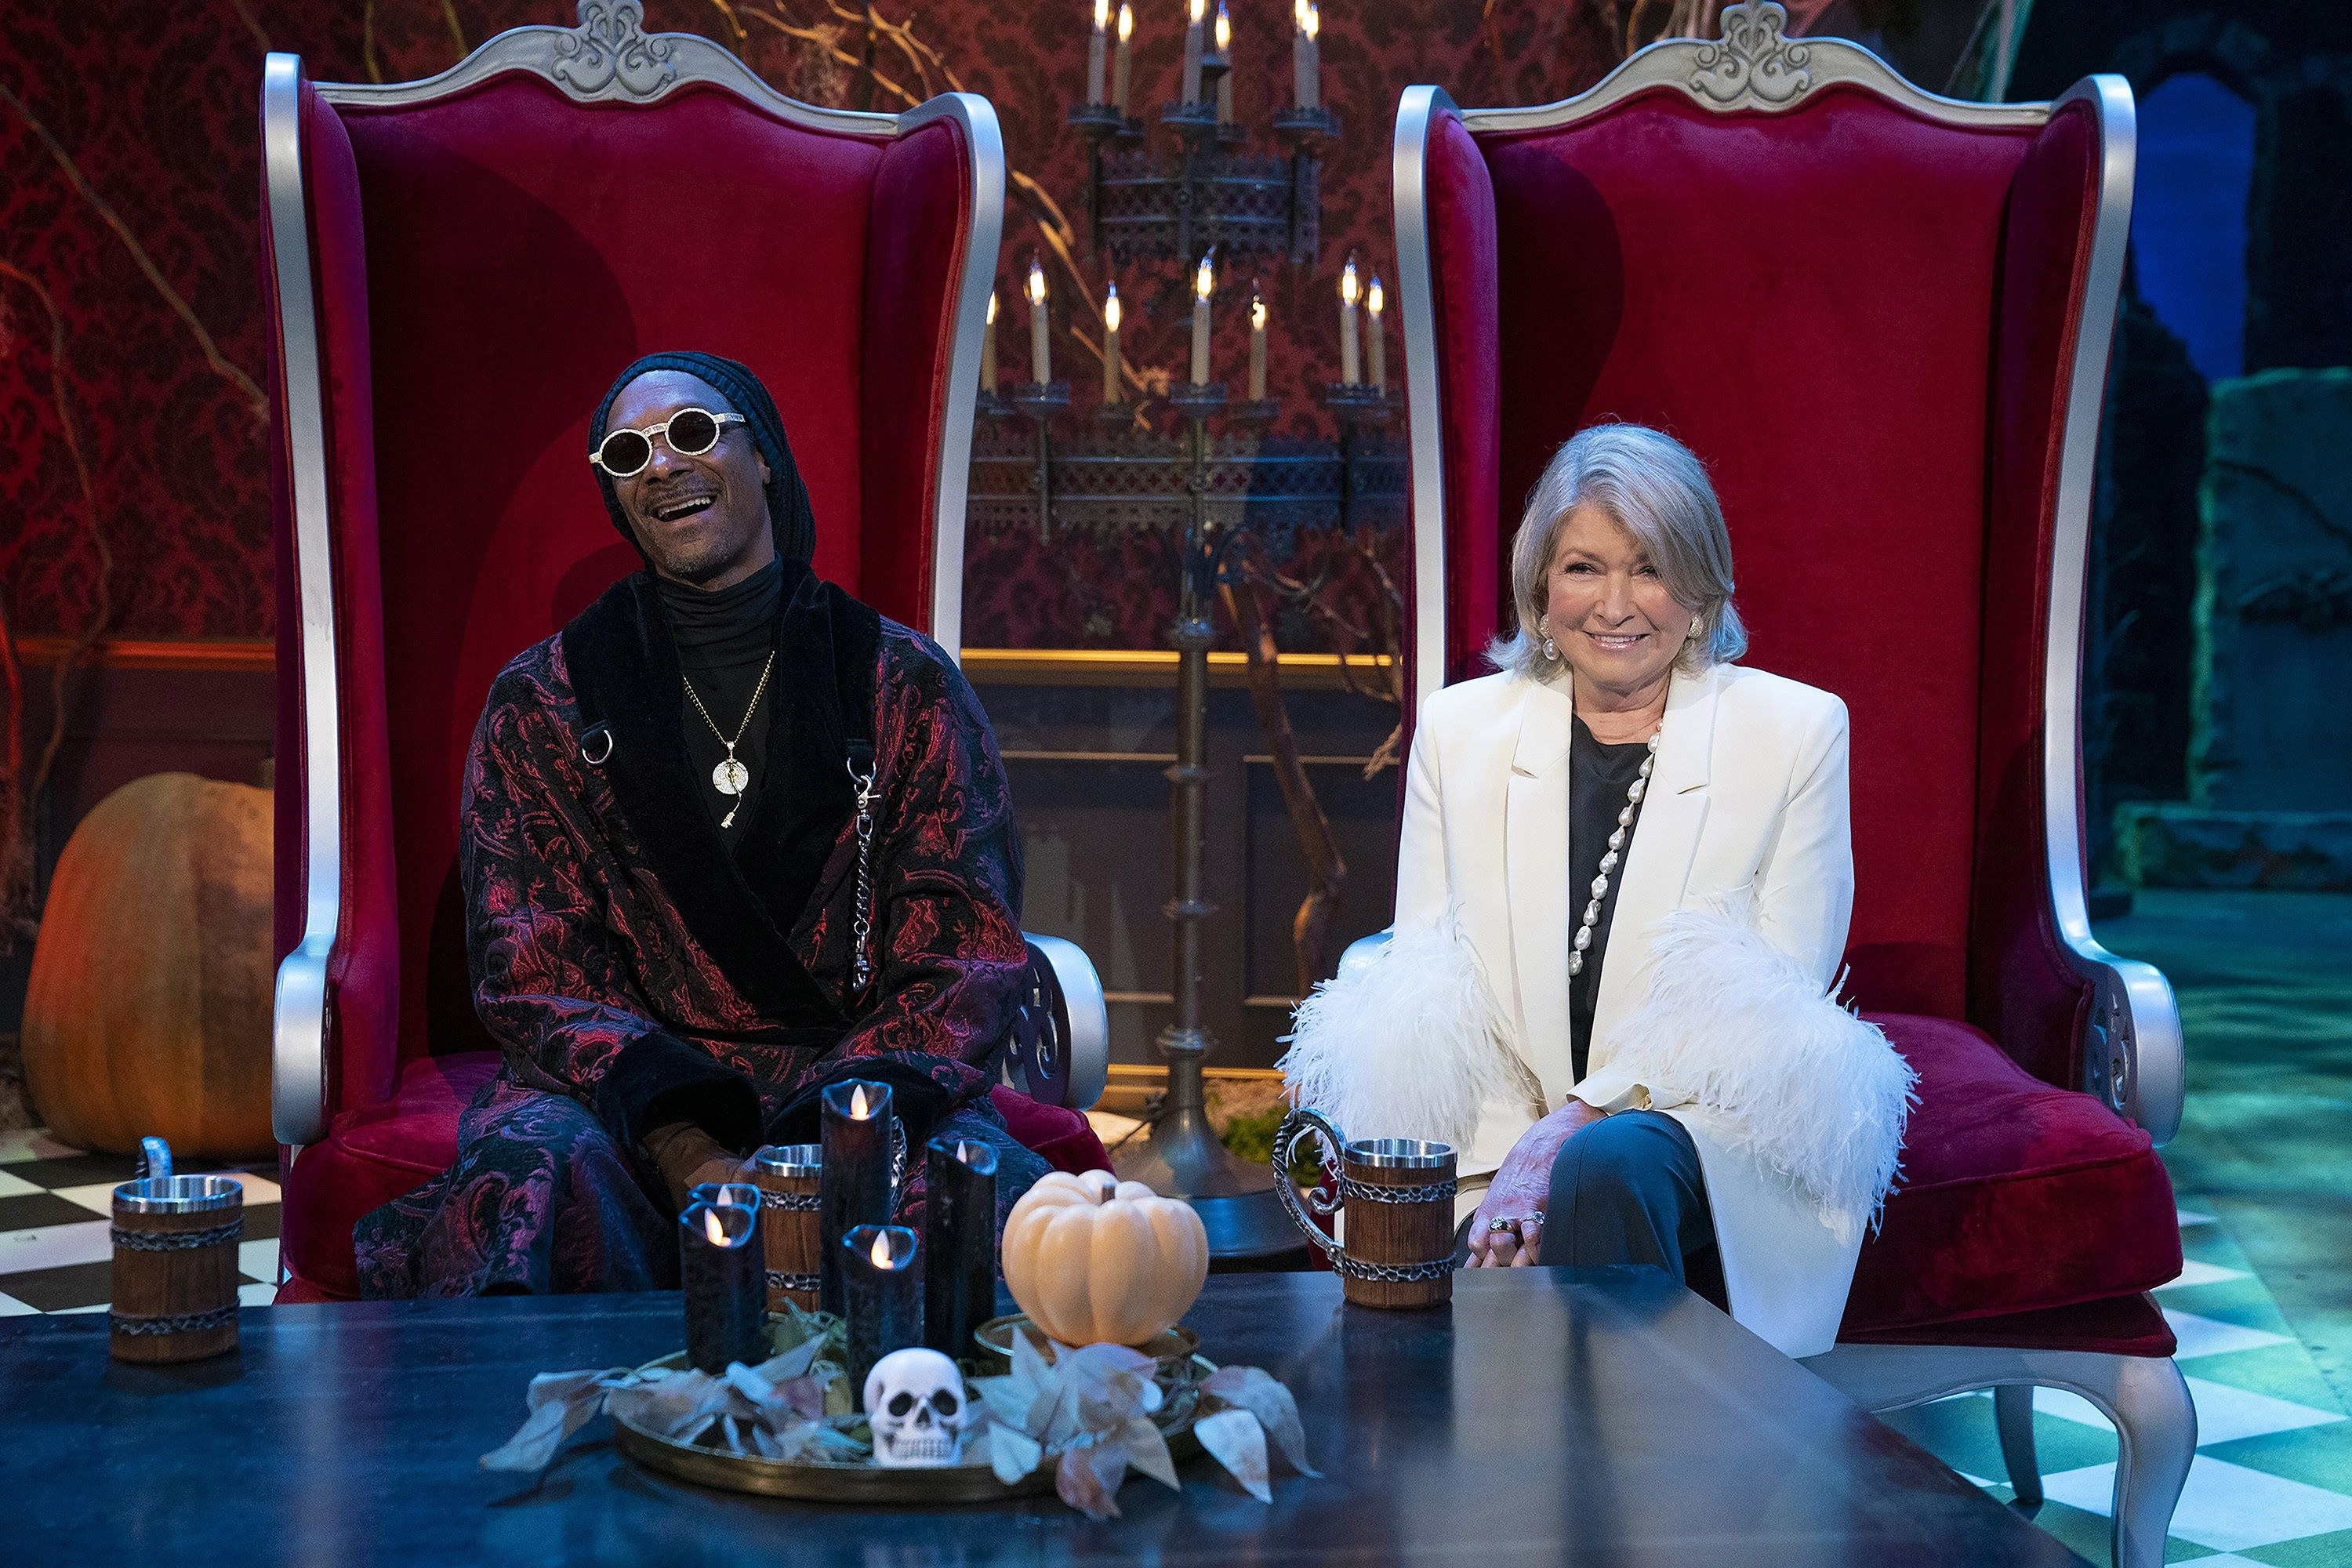 Snoop Dogg and Martha Stewart laughing together